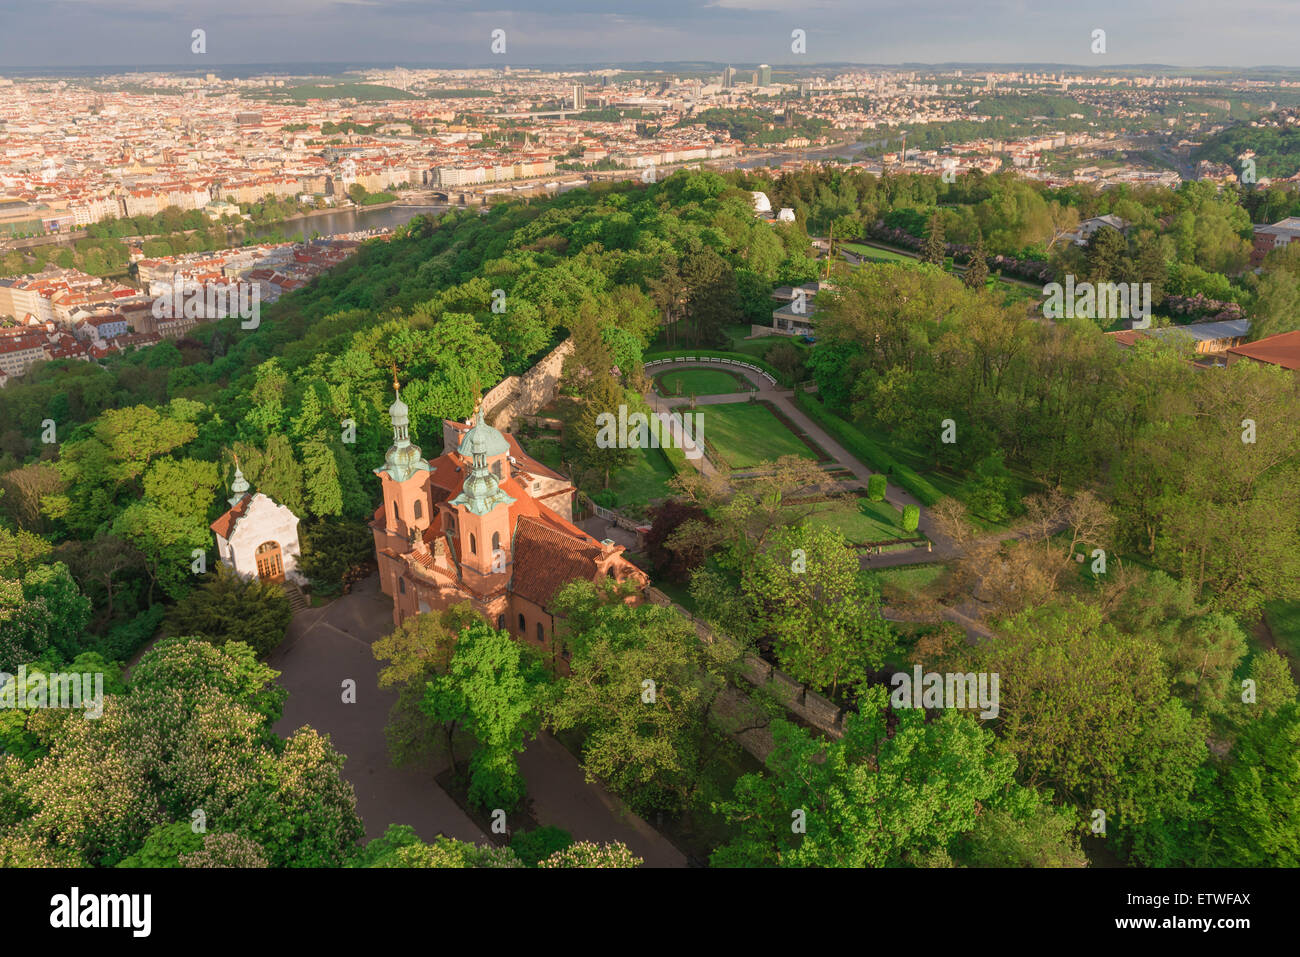 Prague Petrin park, view from the top of Petrin Hill of the park and the historical centre of Prague, Czech Republic, Czechia Stock Photo